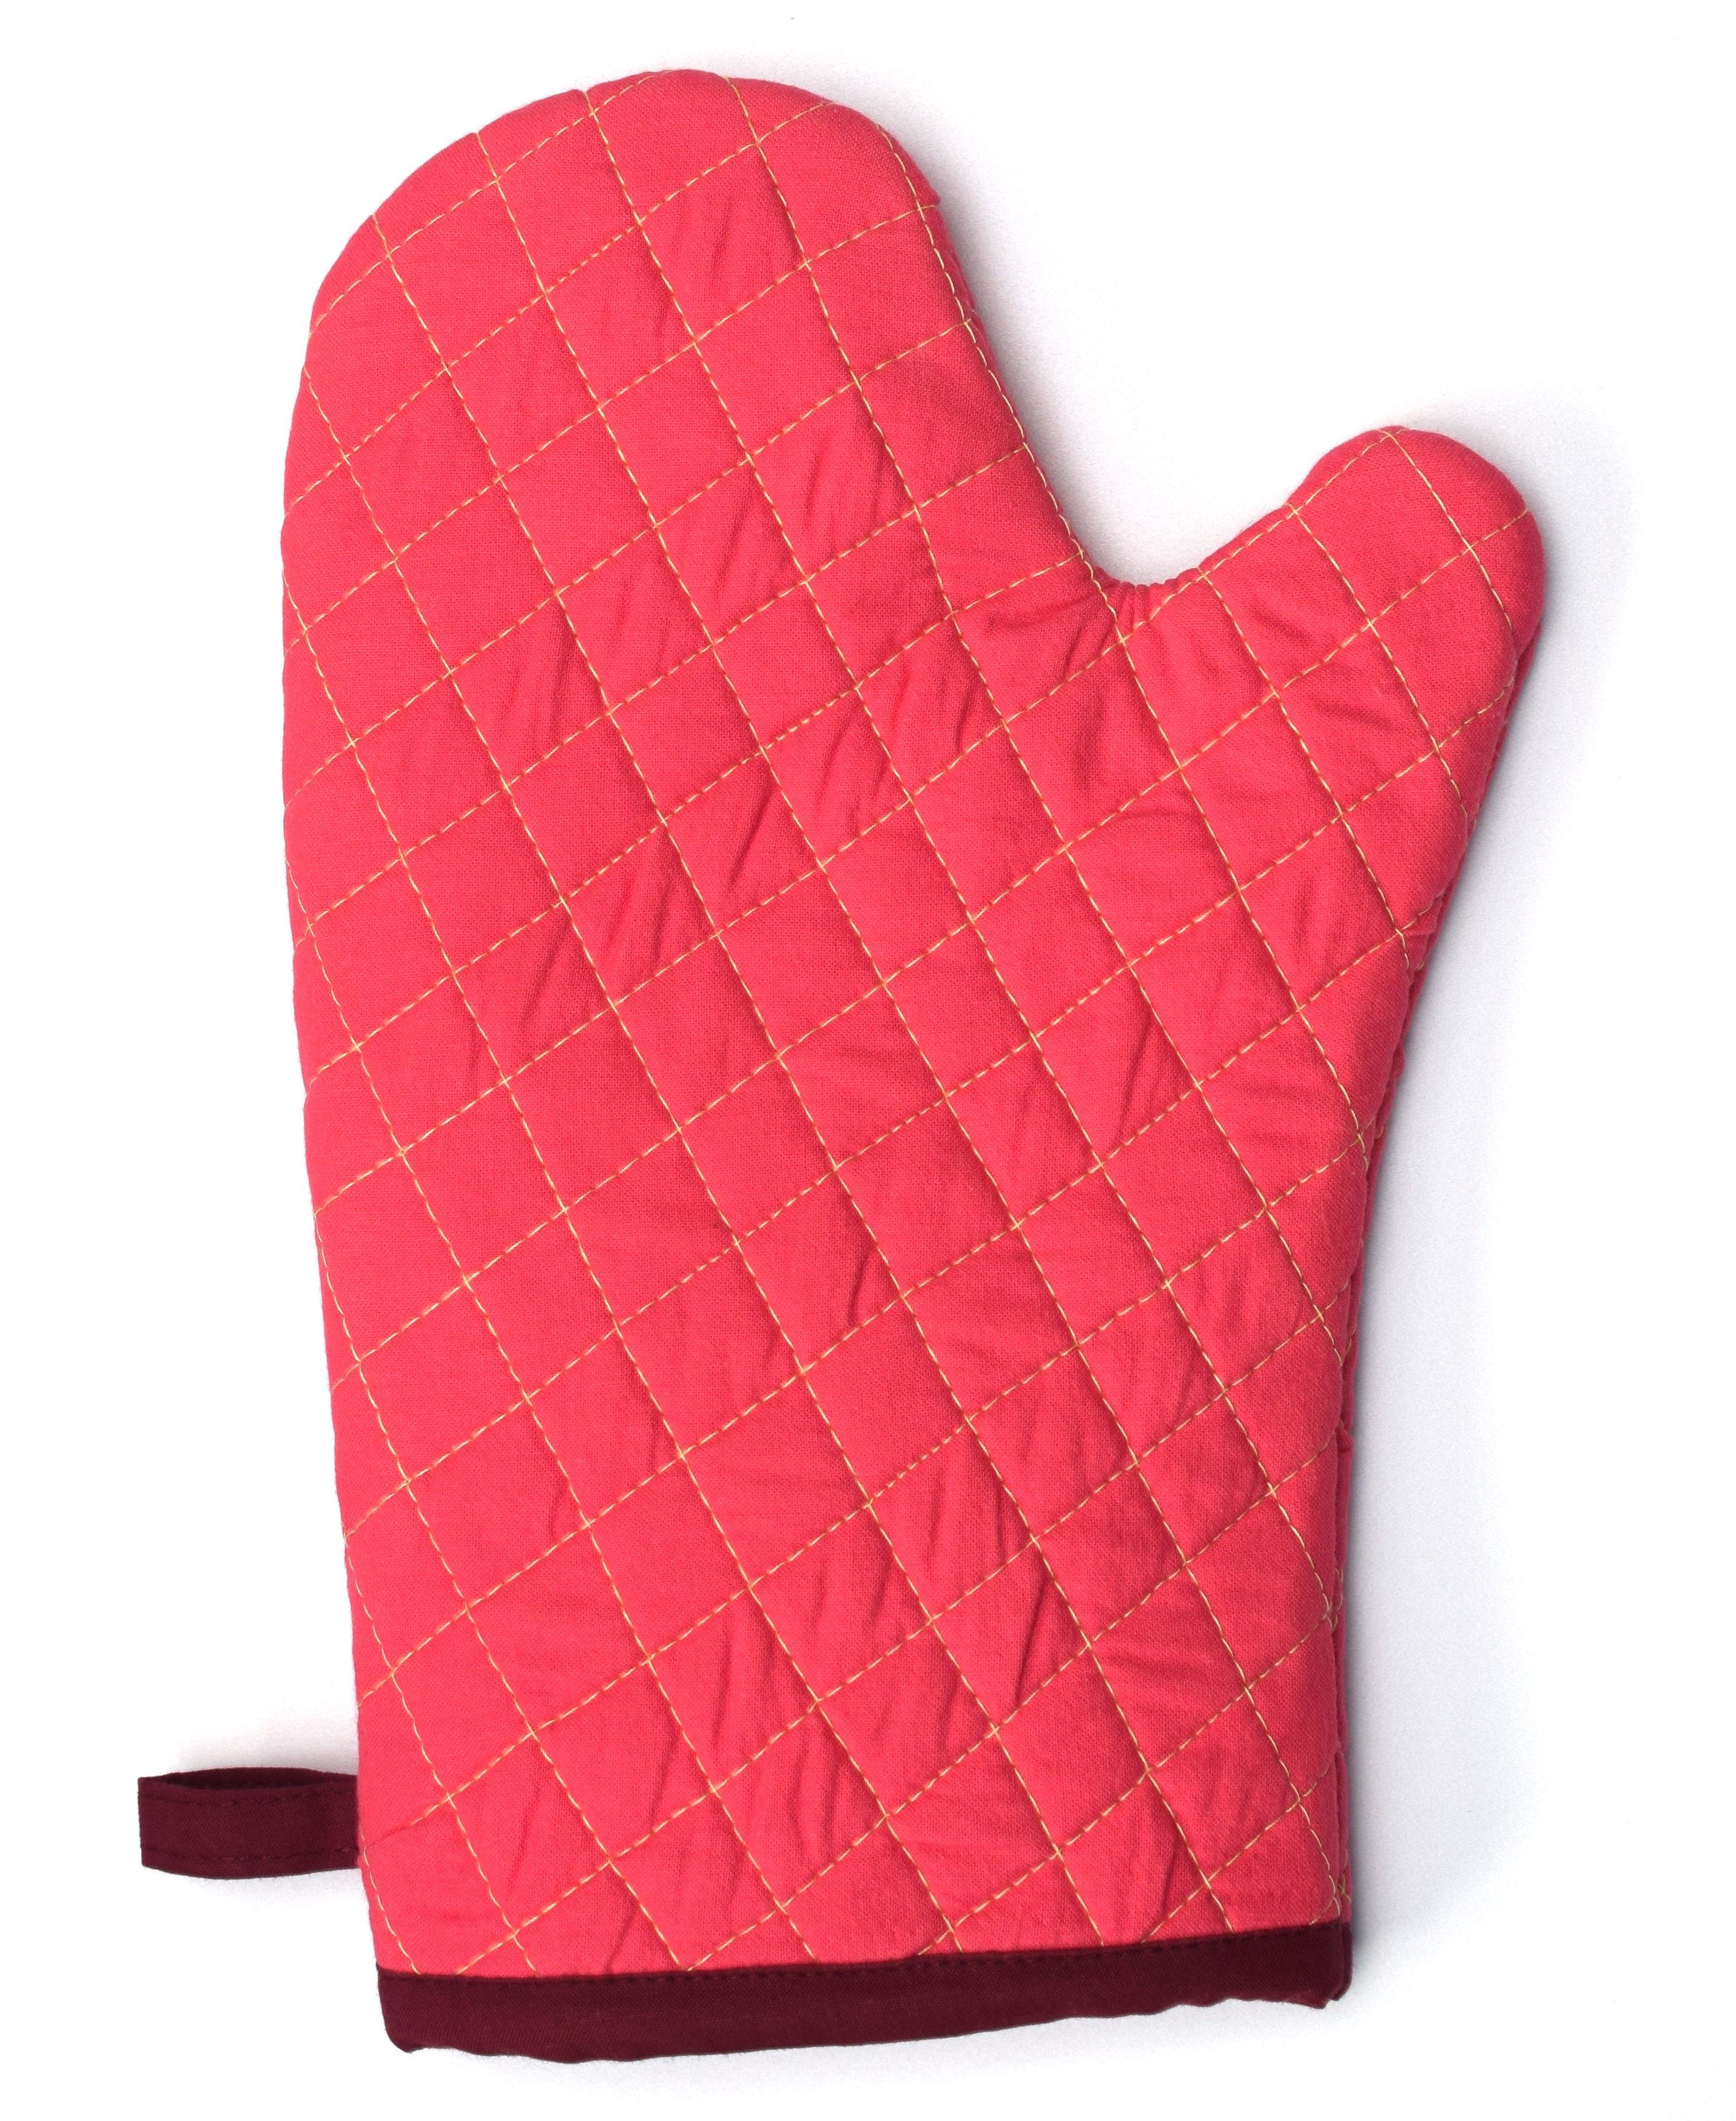 Get Your Mitts on These: Sew Your Own Insanely Stylish Oven Gloves!